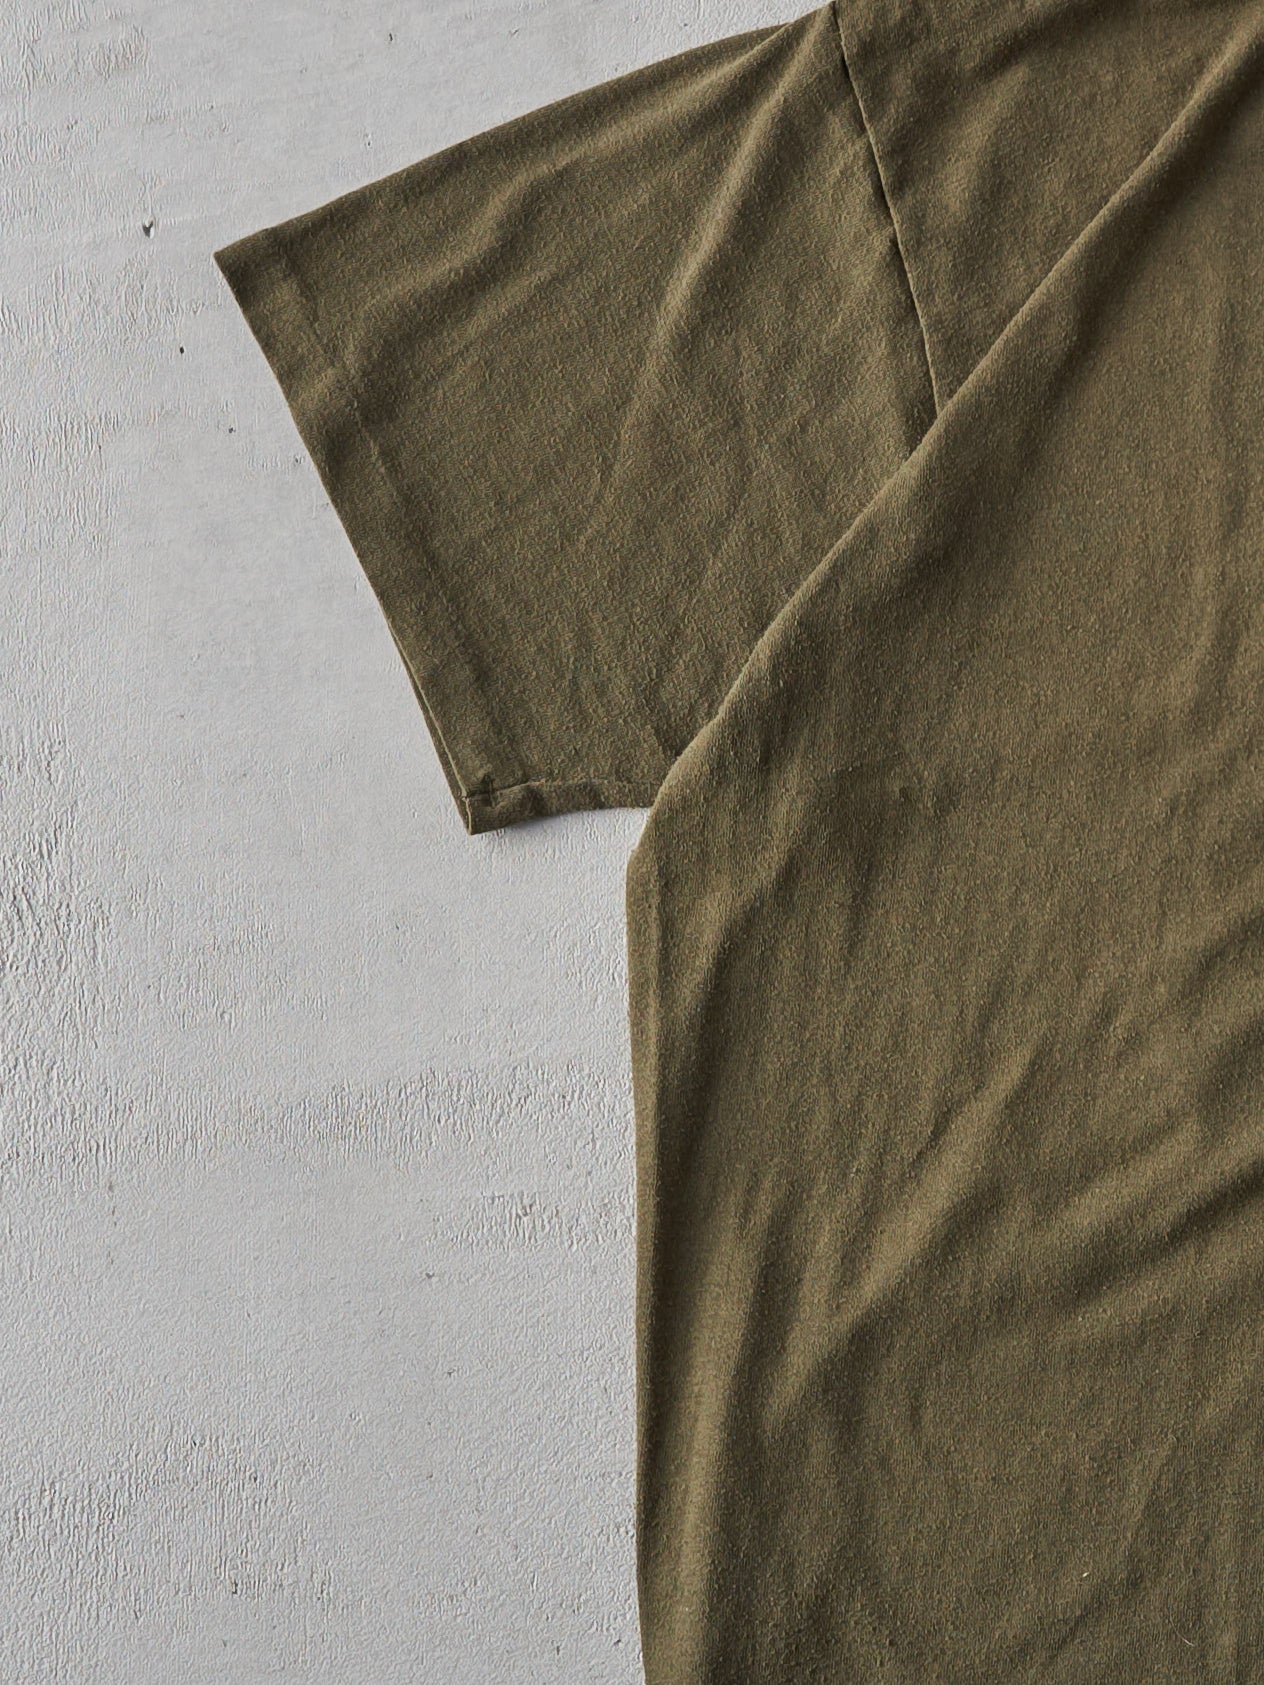 Vintage 80s Army Green Military Blank Single Stitch Tee (L)